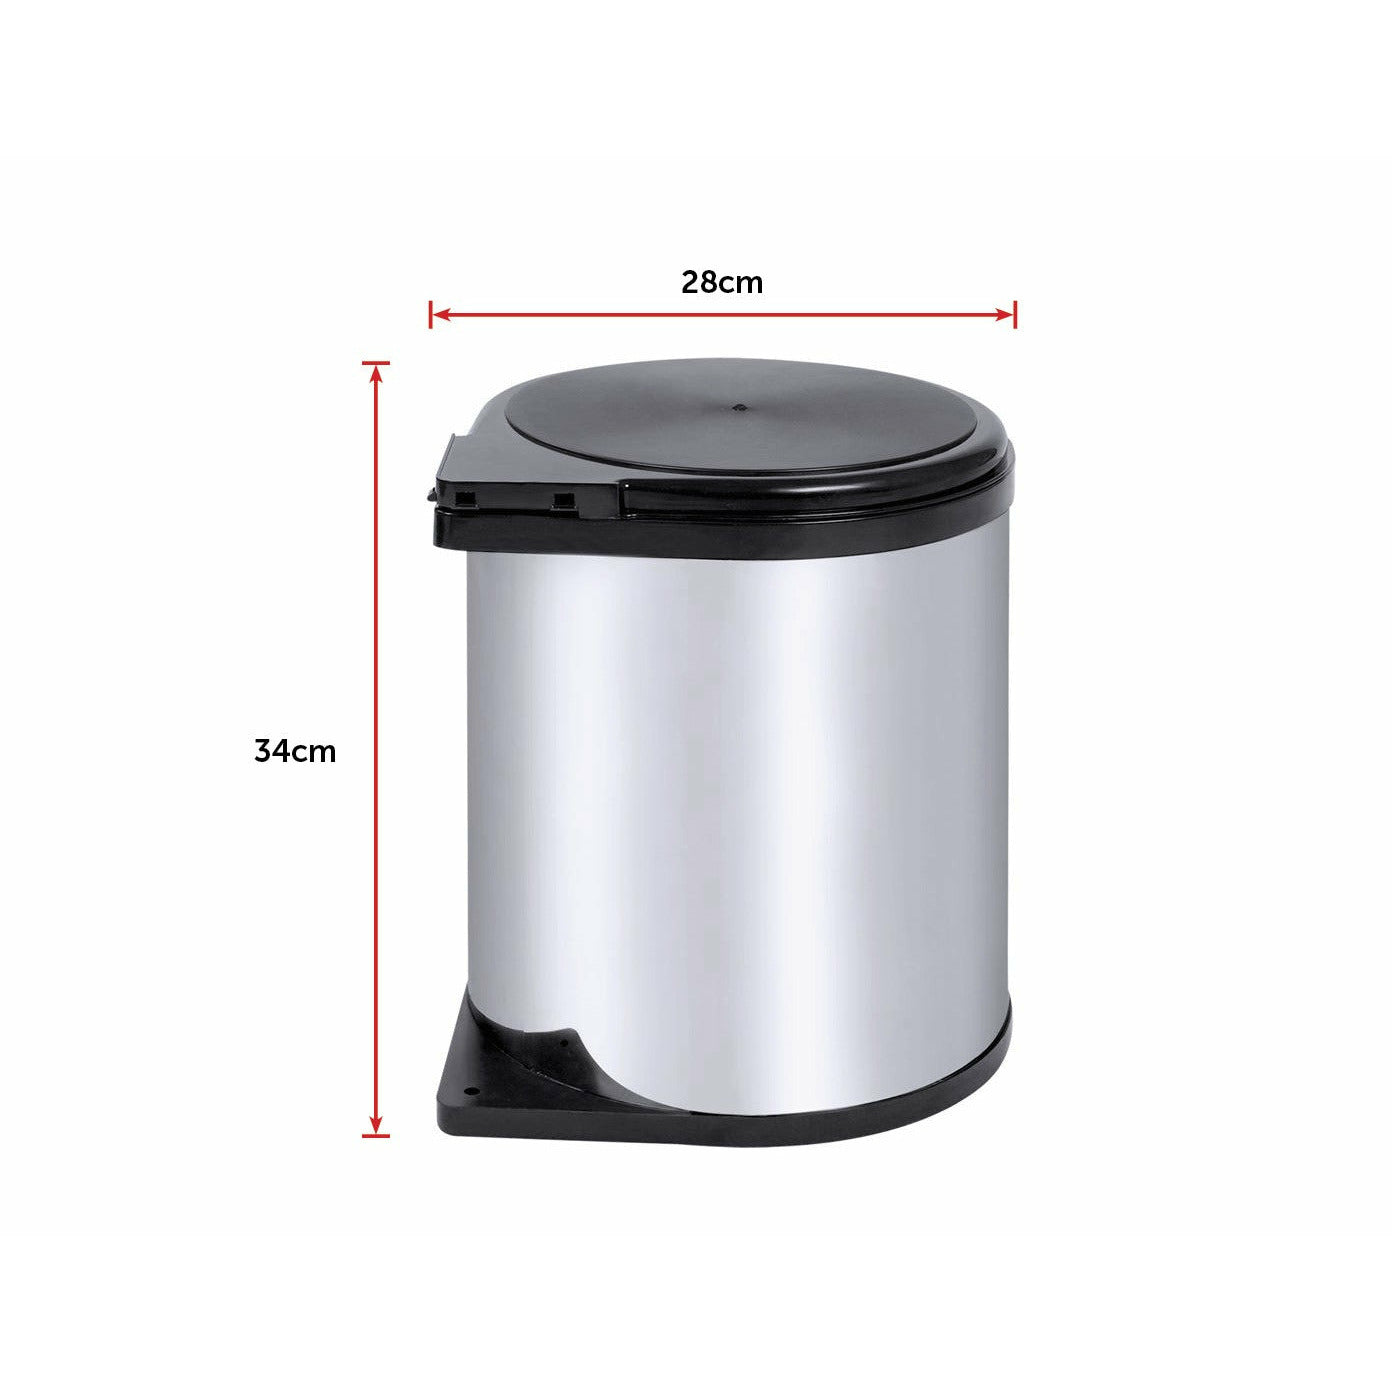 Kitchen Swing Pull Out Bin Stainless Steel Garbage Rubbish Waste Trash Can 14L